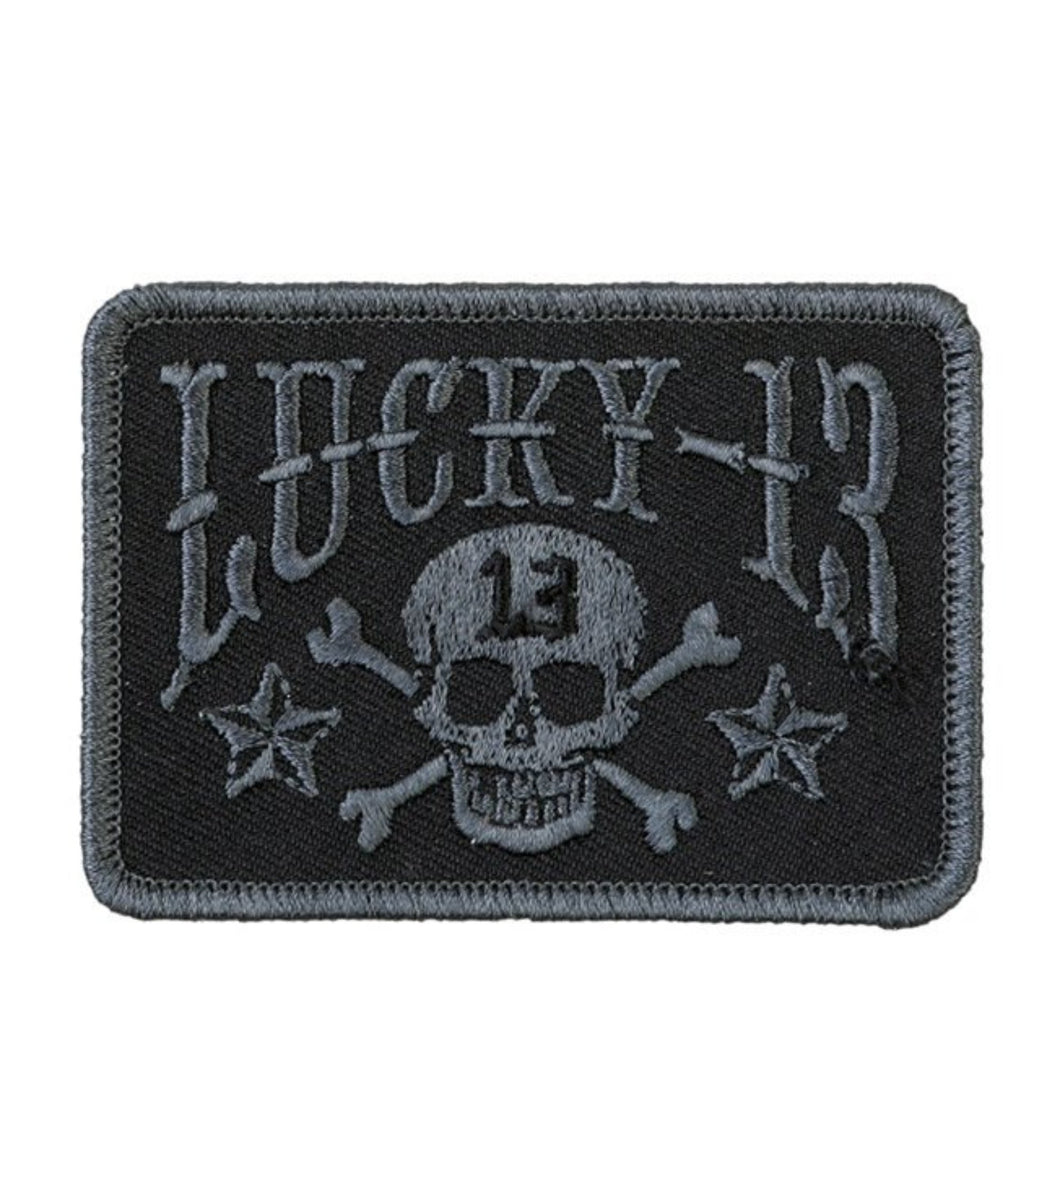 Fully embroidered black on black patch with skull and crossbones, stars, and Lucky 13 logo. 